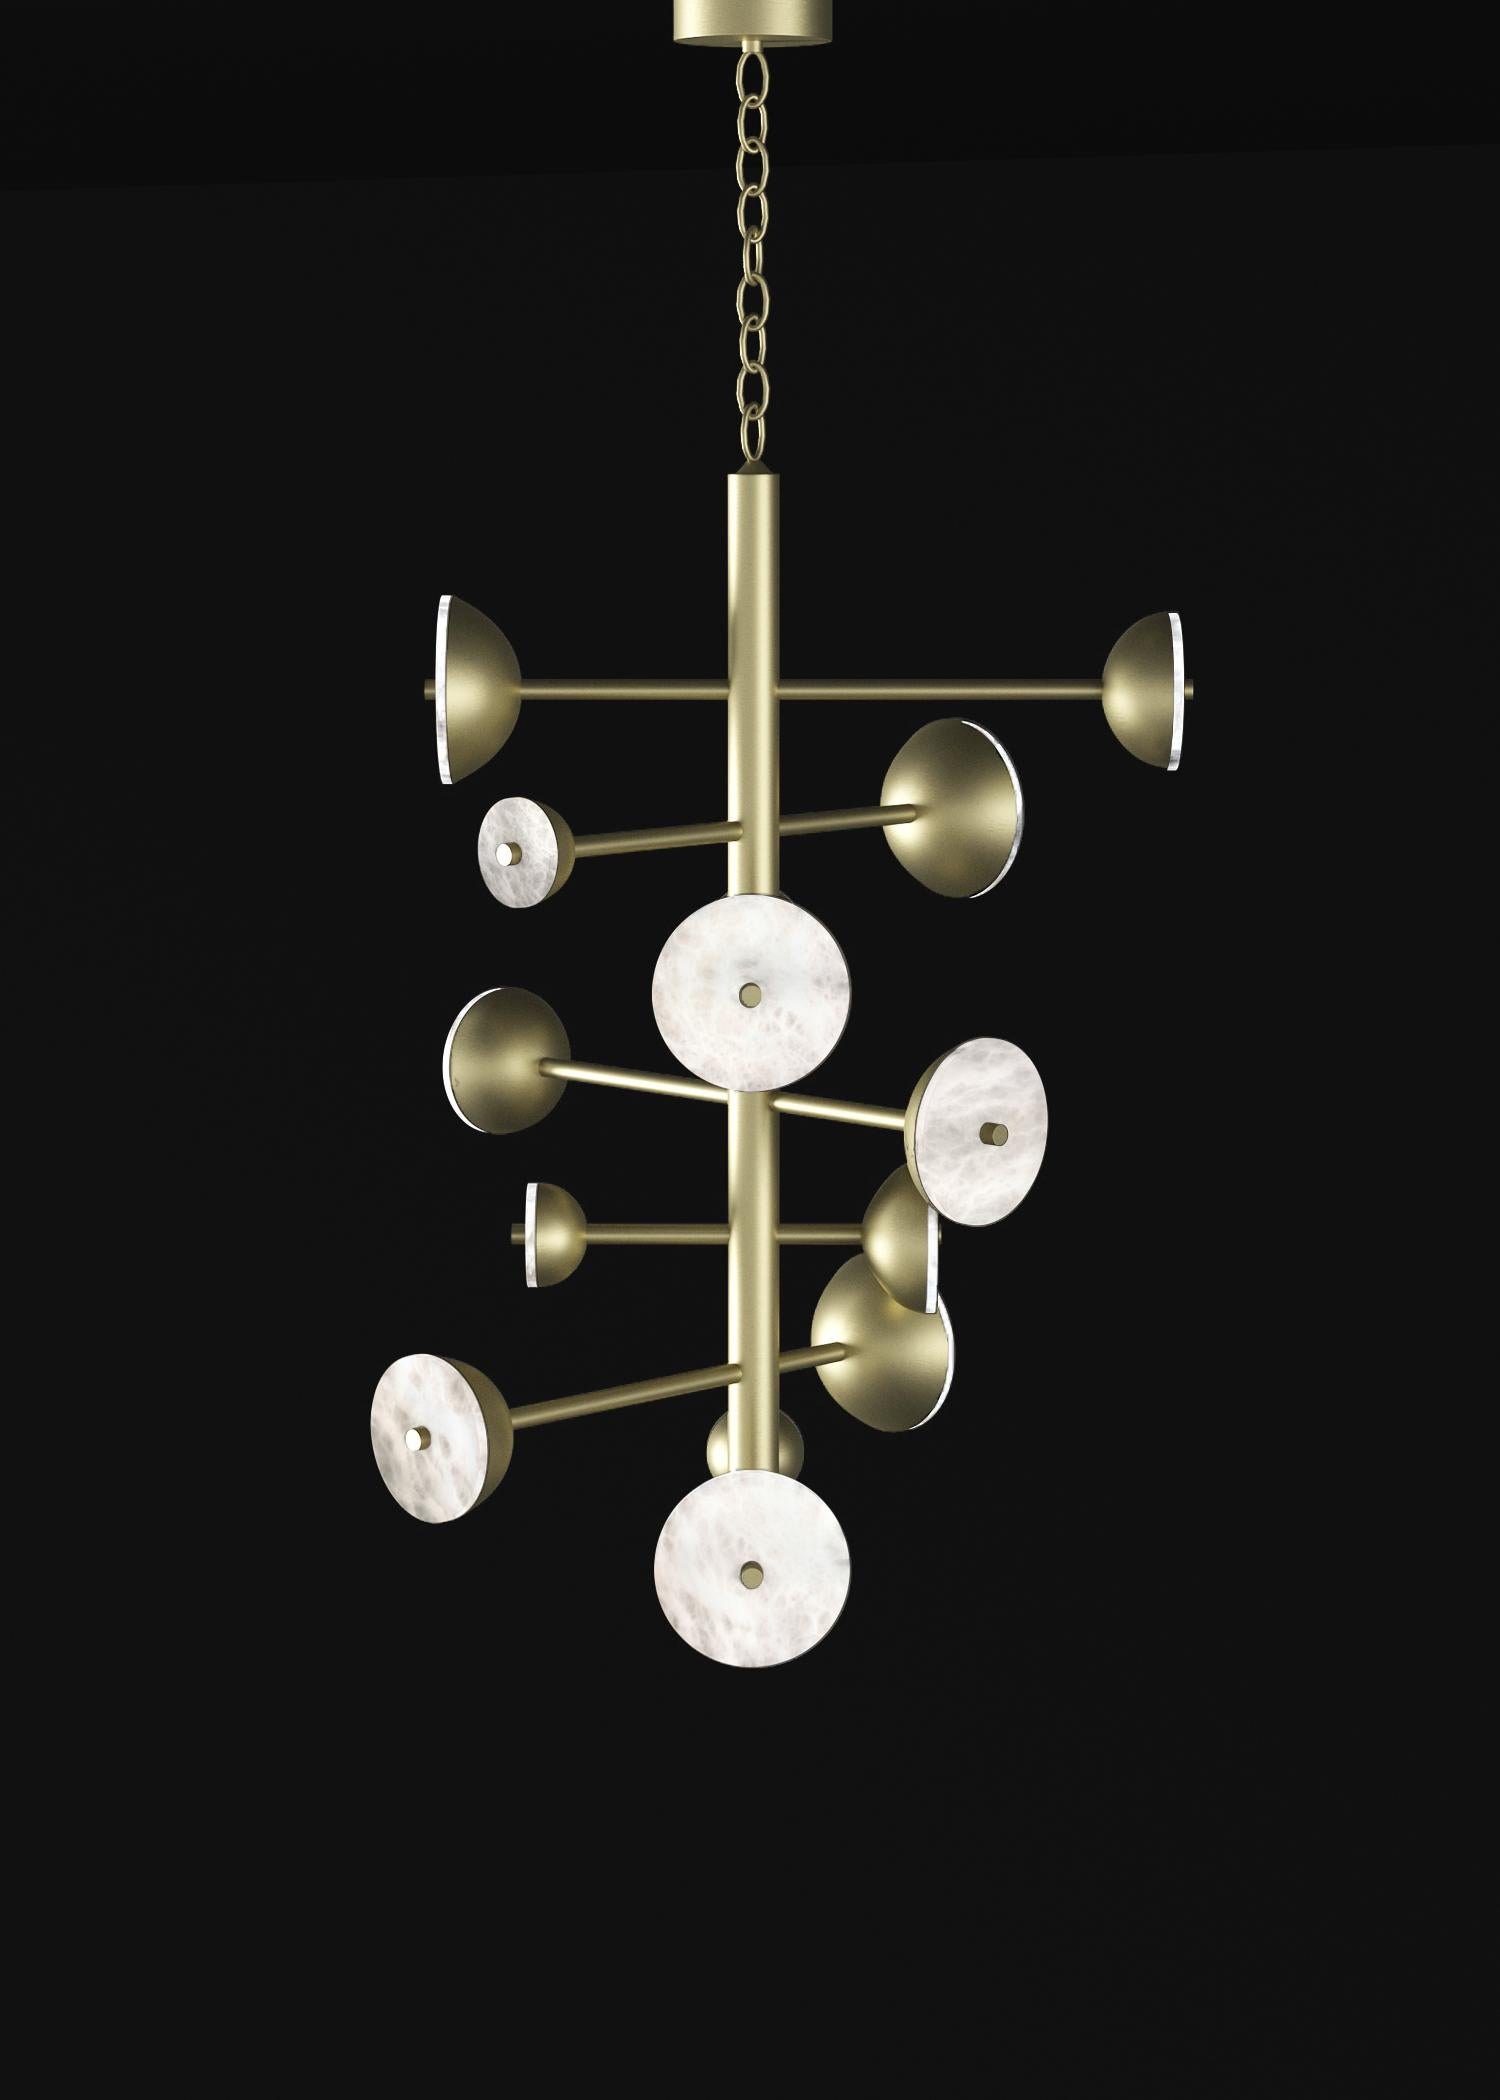 Teti Brushed Brass Chandelier by Alabastro Italiano
Dimensions: D 74,5 x W 77,5 x H 110 cm.
Materials: White alabaster and brass.

Available in different finishes: Shiny Silver, Bronze, Brushed Brass, Ruggine of Florence, Brushed Burnished, Shiny